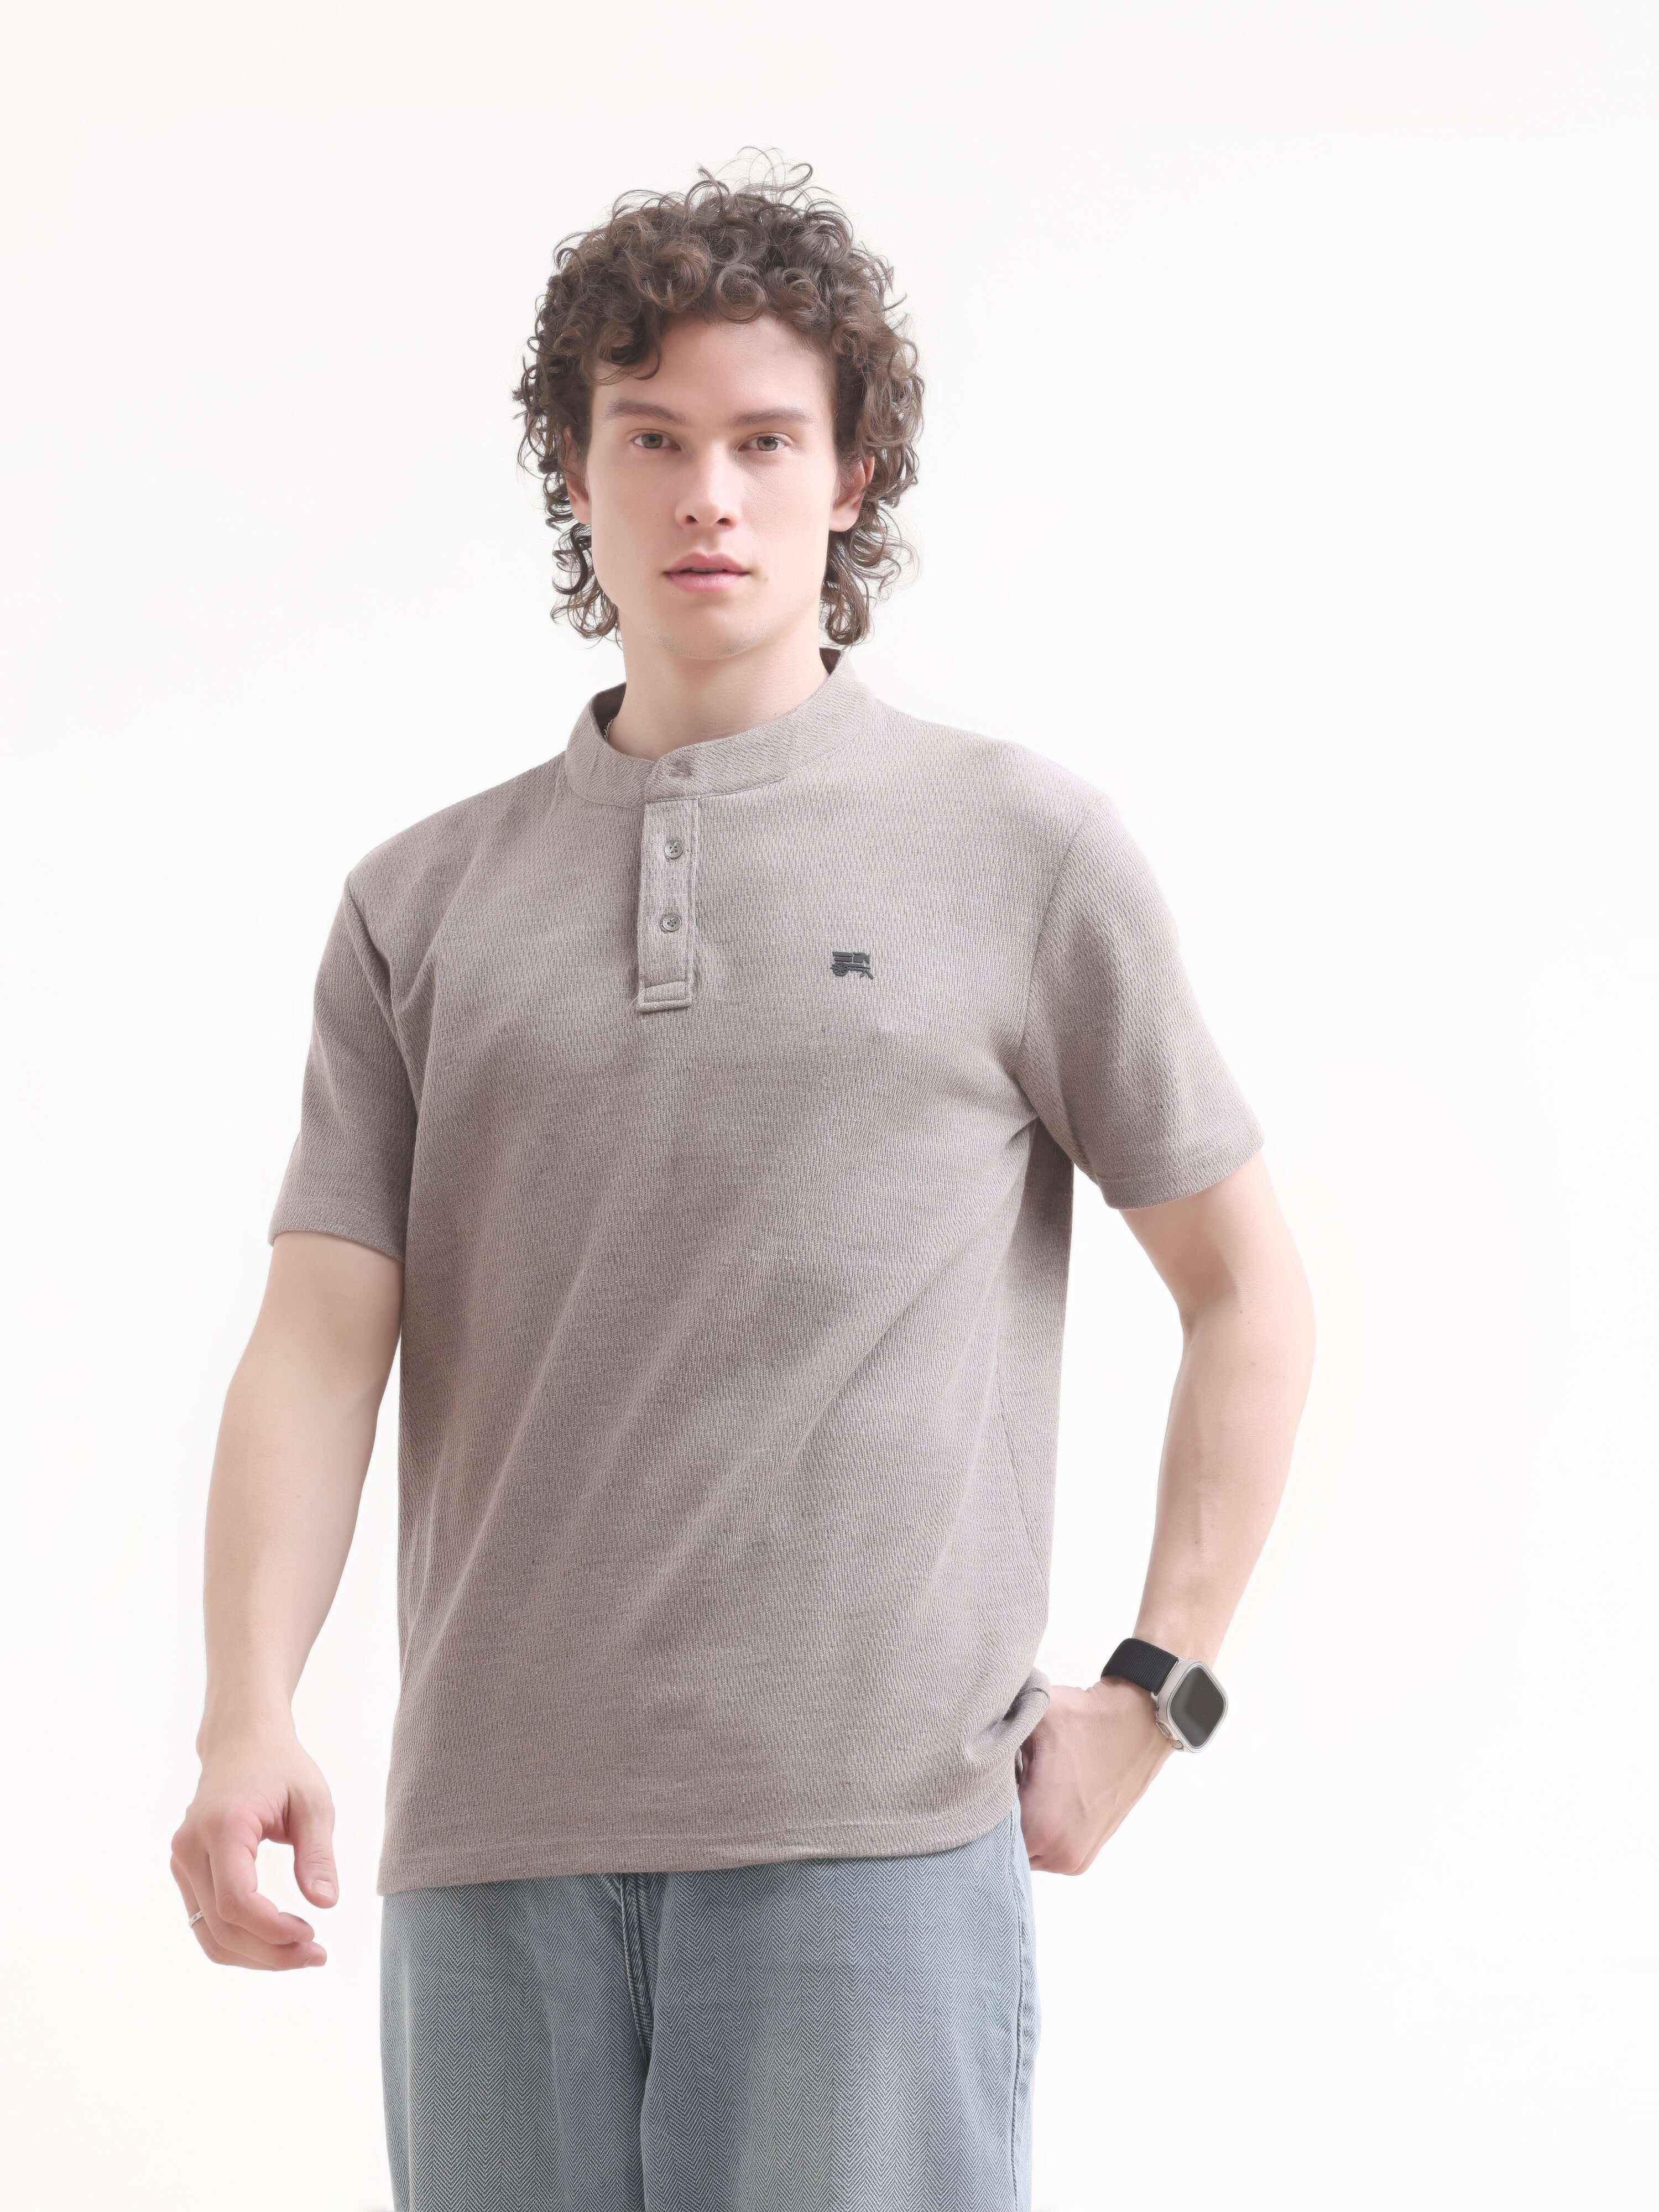 Pinnacle Henley T-Shirt - Dusky Brown | Men's Casual Wear shop online at Estilocus. Shop the latest in men's fashion with the Pinnacle Dusky Brown Henley T-Shirt. Perfect for summer casuals, made from 100% soft cotton. New arrival!